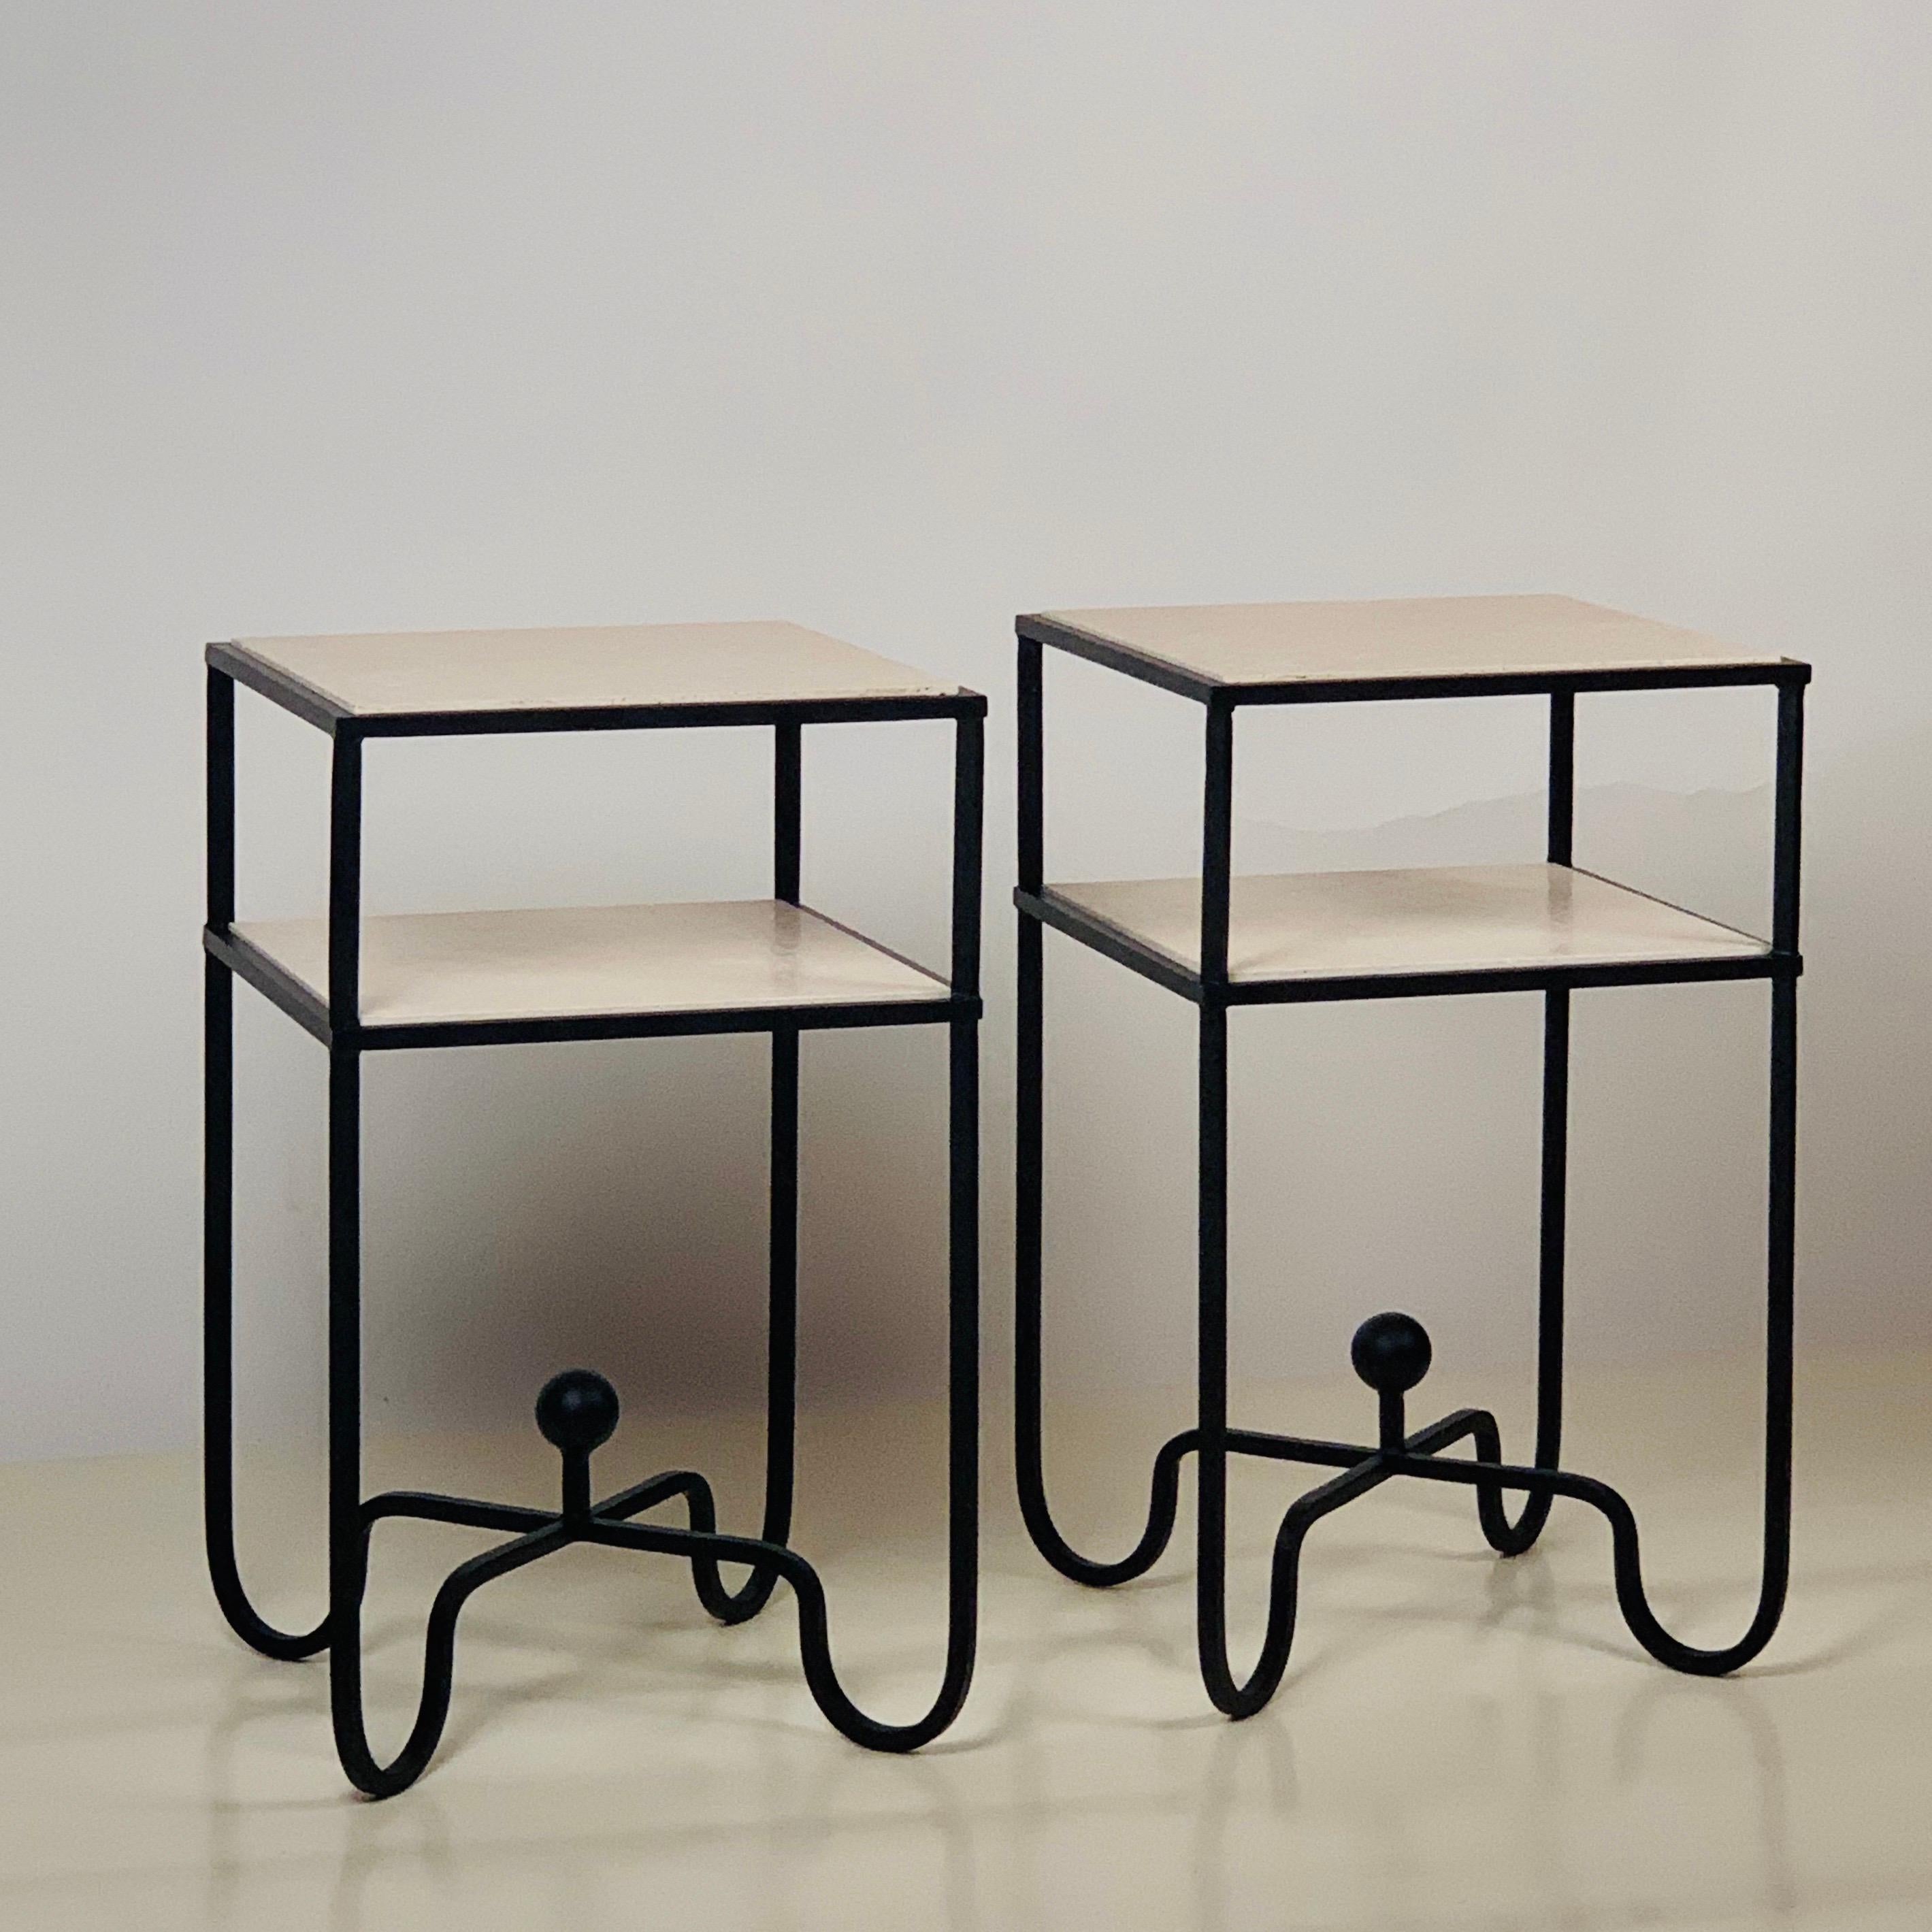 In-Stock pair of 2-tier 'Entretoise' side tables by Design Frères. Wrought iron base with 2 thin cream travertine shelves. Also great as small nightstands. Shelves are removable for secure shipping and cleaning.

In stock now and ready to ship.